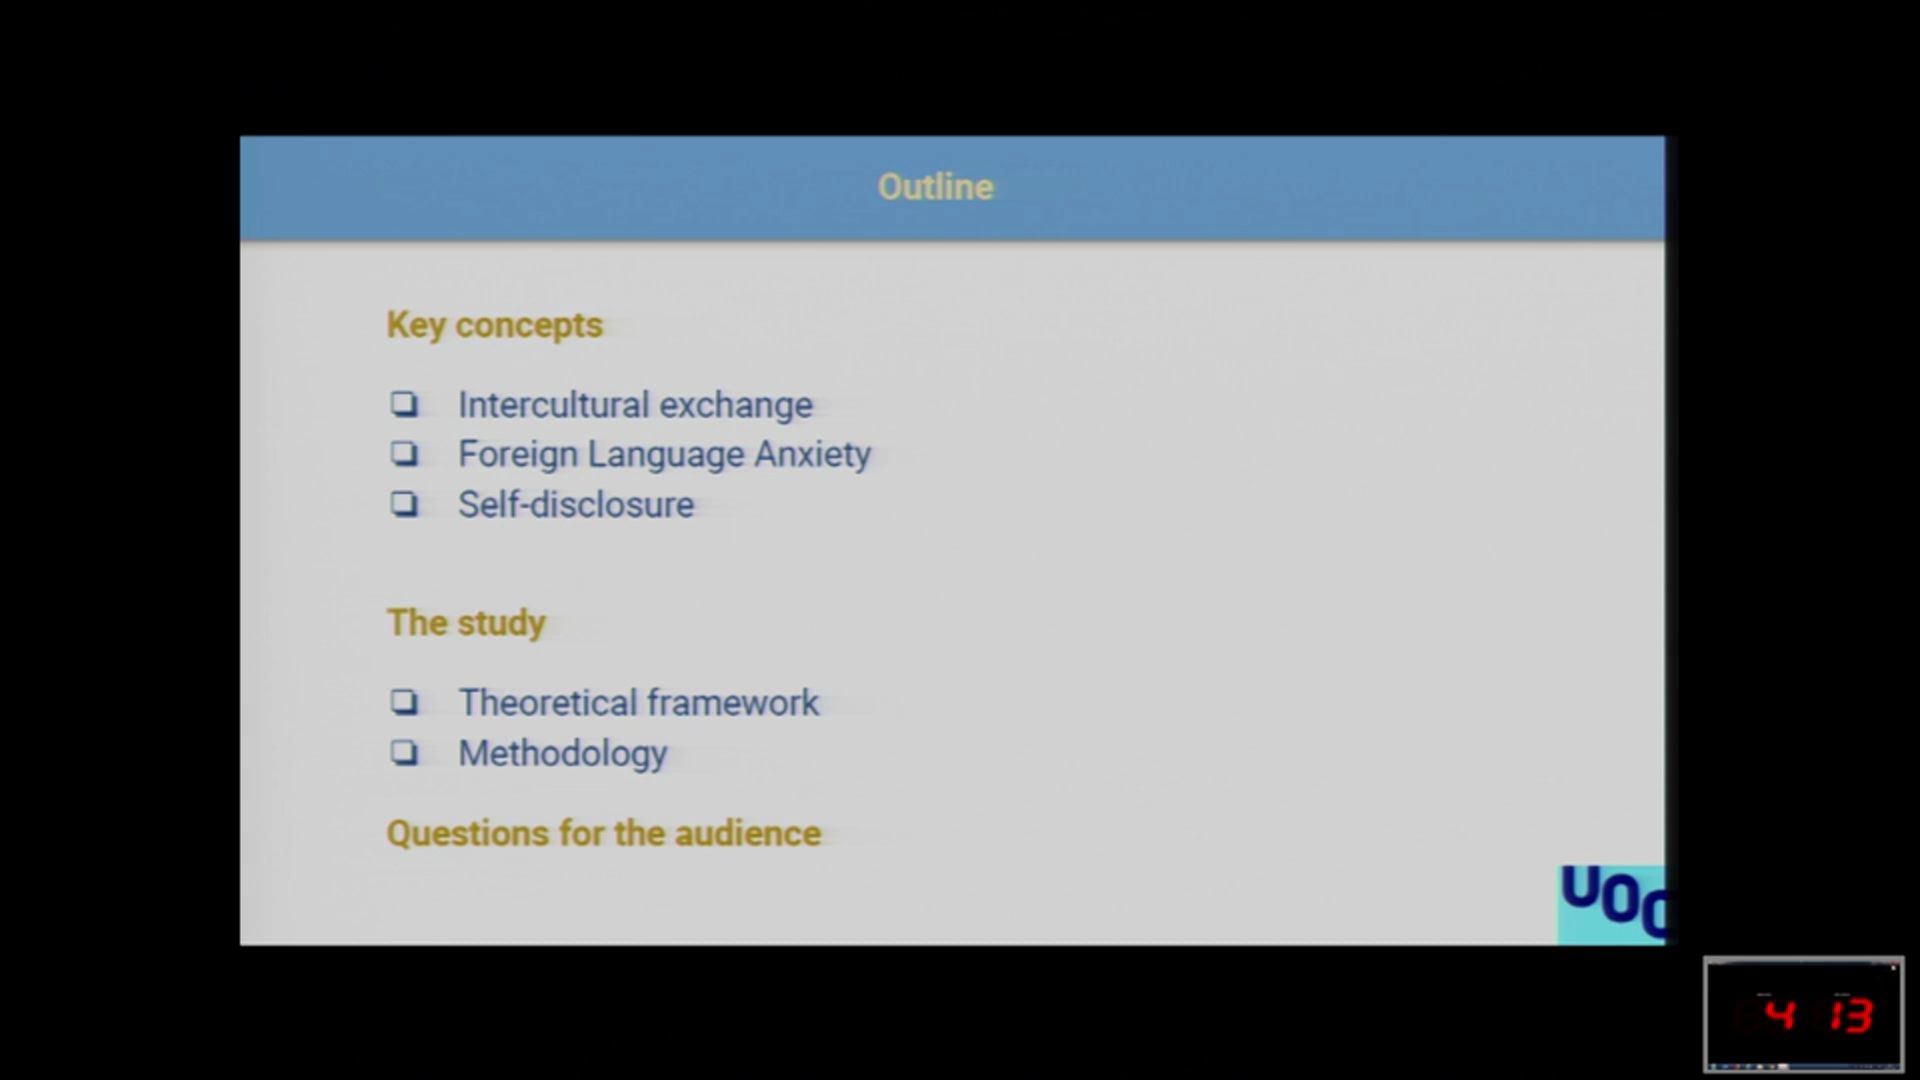 I am not shy, I am anxious: Foreign Language Anxiety and Self-disclosure in intercultural Virtual Exchanges